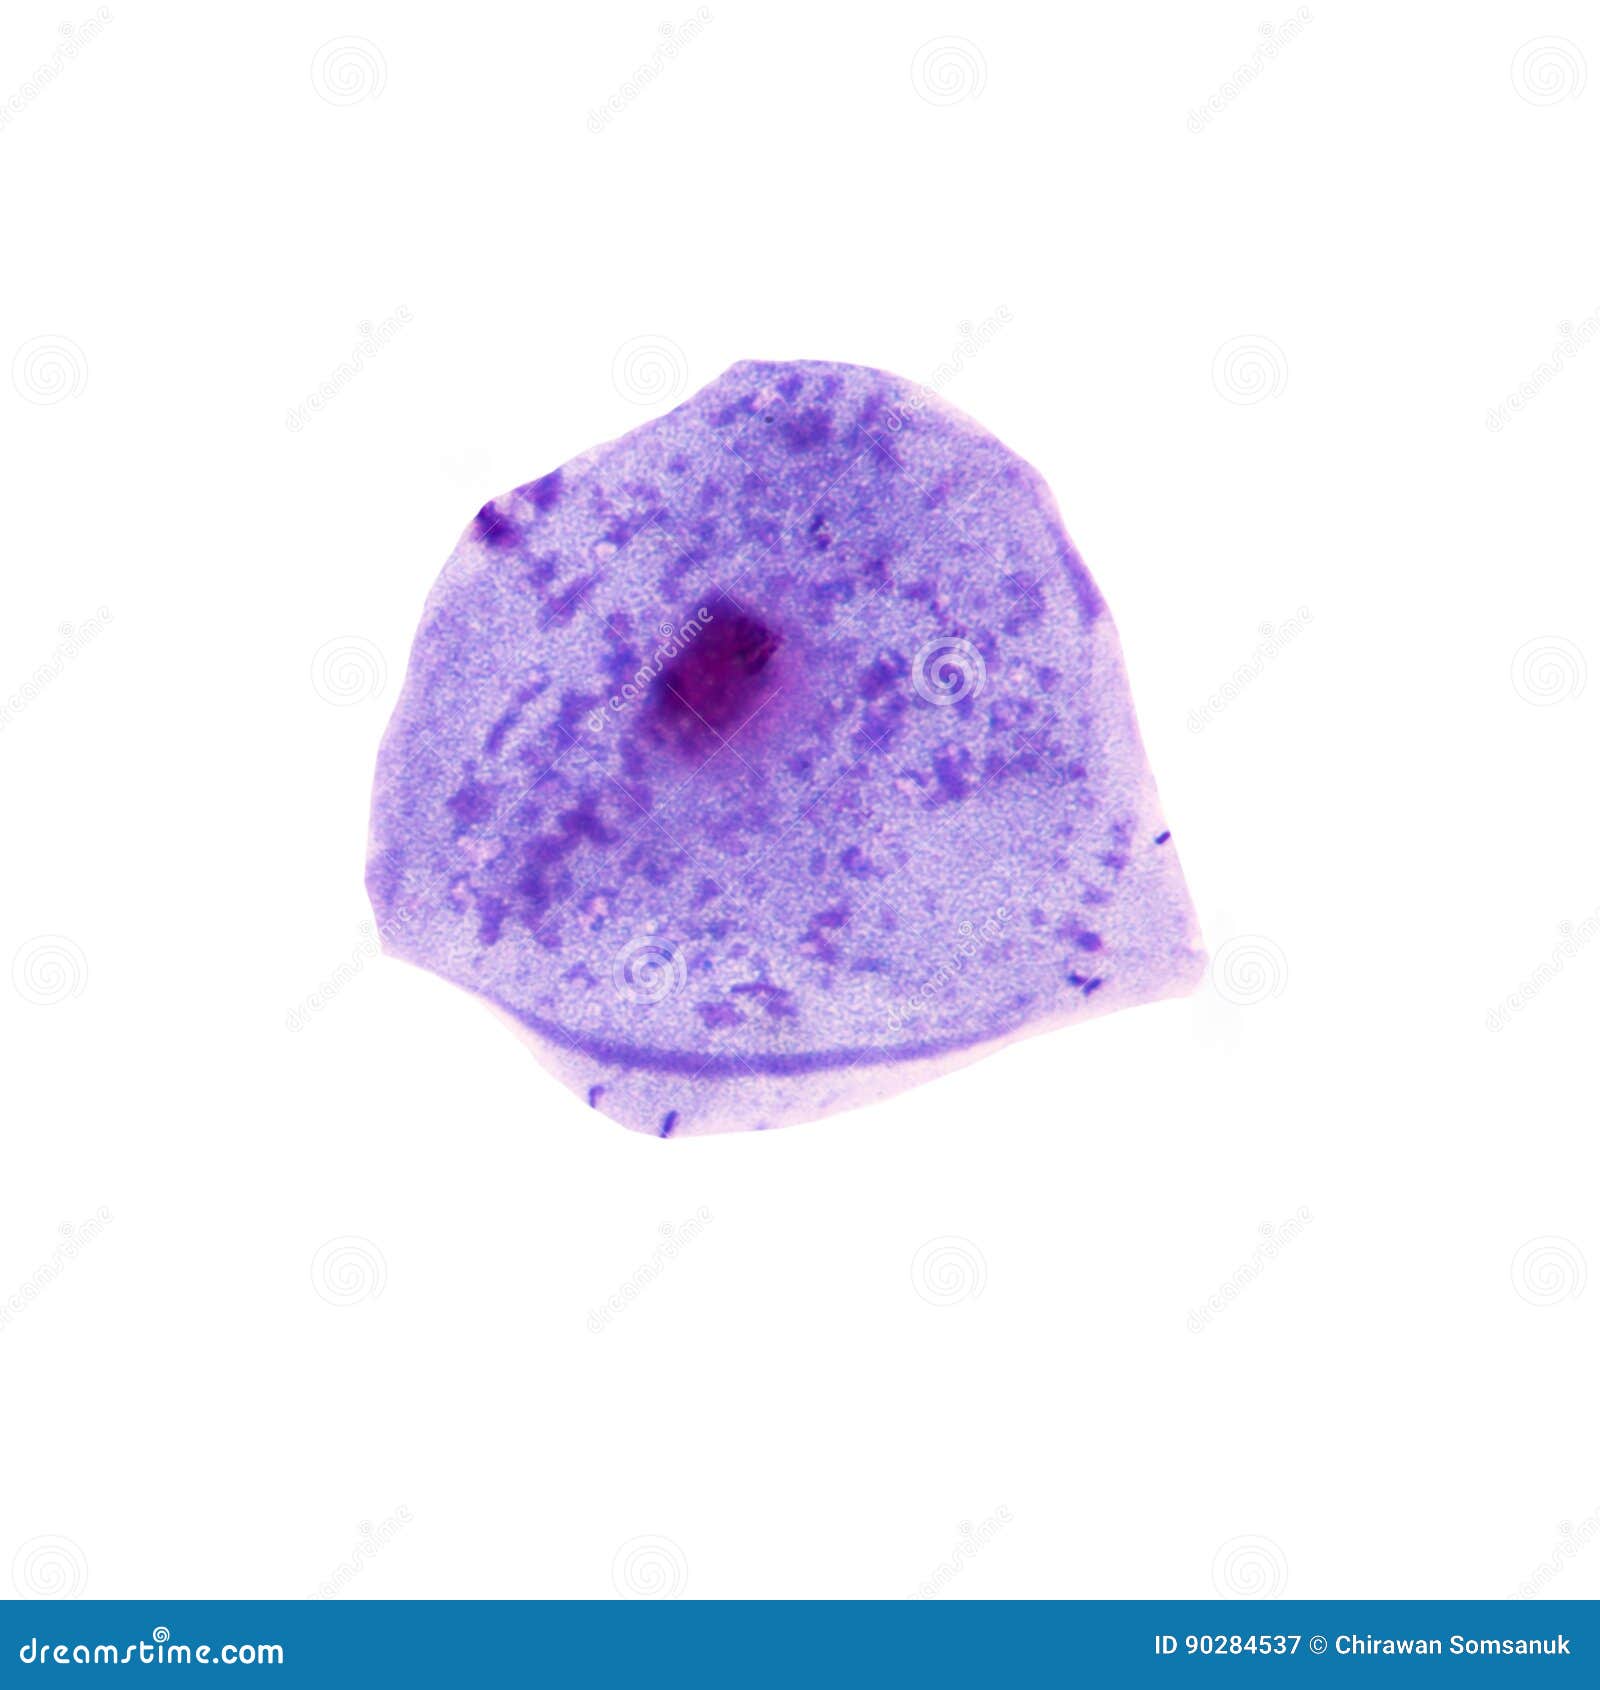 blue epithelial cell